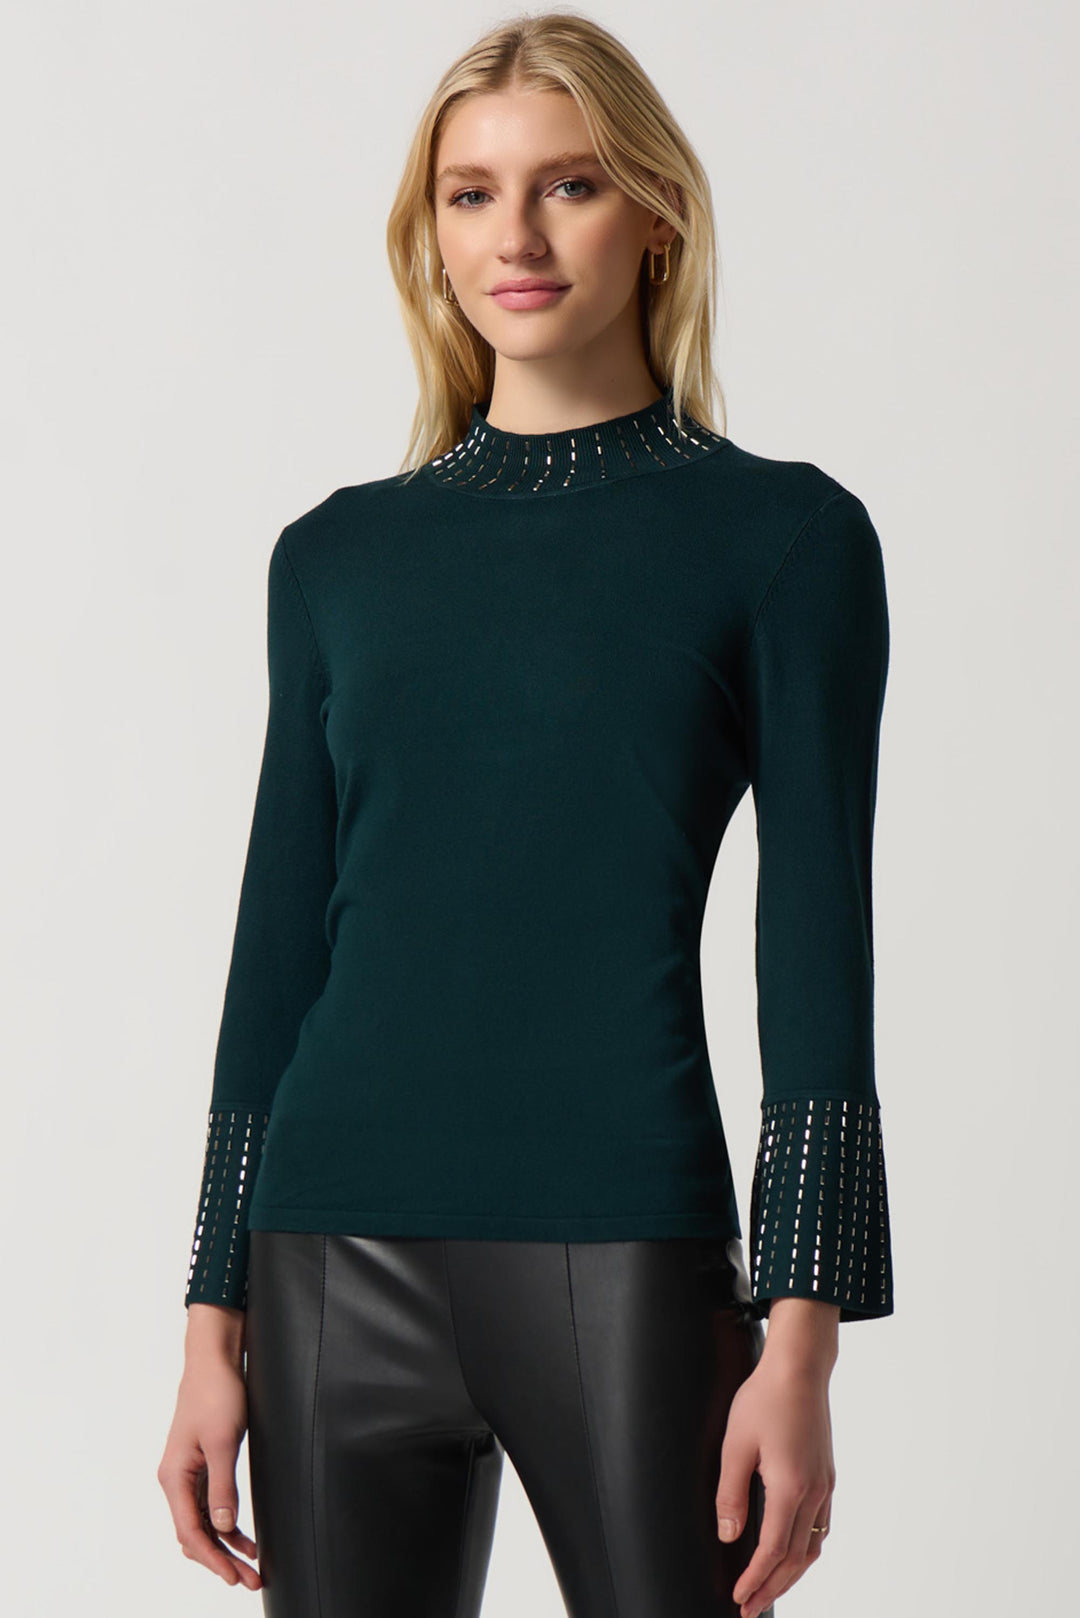 "Joseph Ribkoff Alpine Green Embellished Sweater With Bell Sleeve and Mock Neck Style 234920"